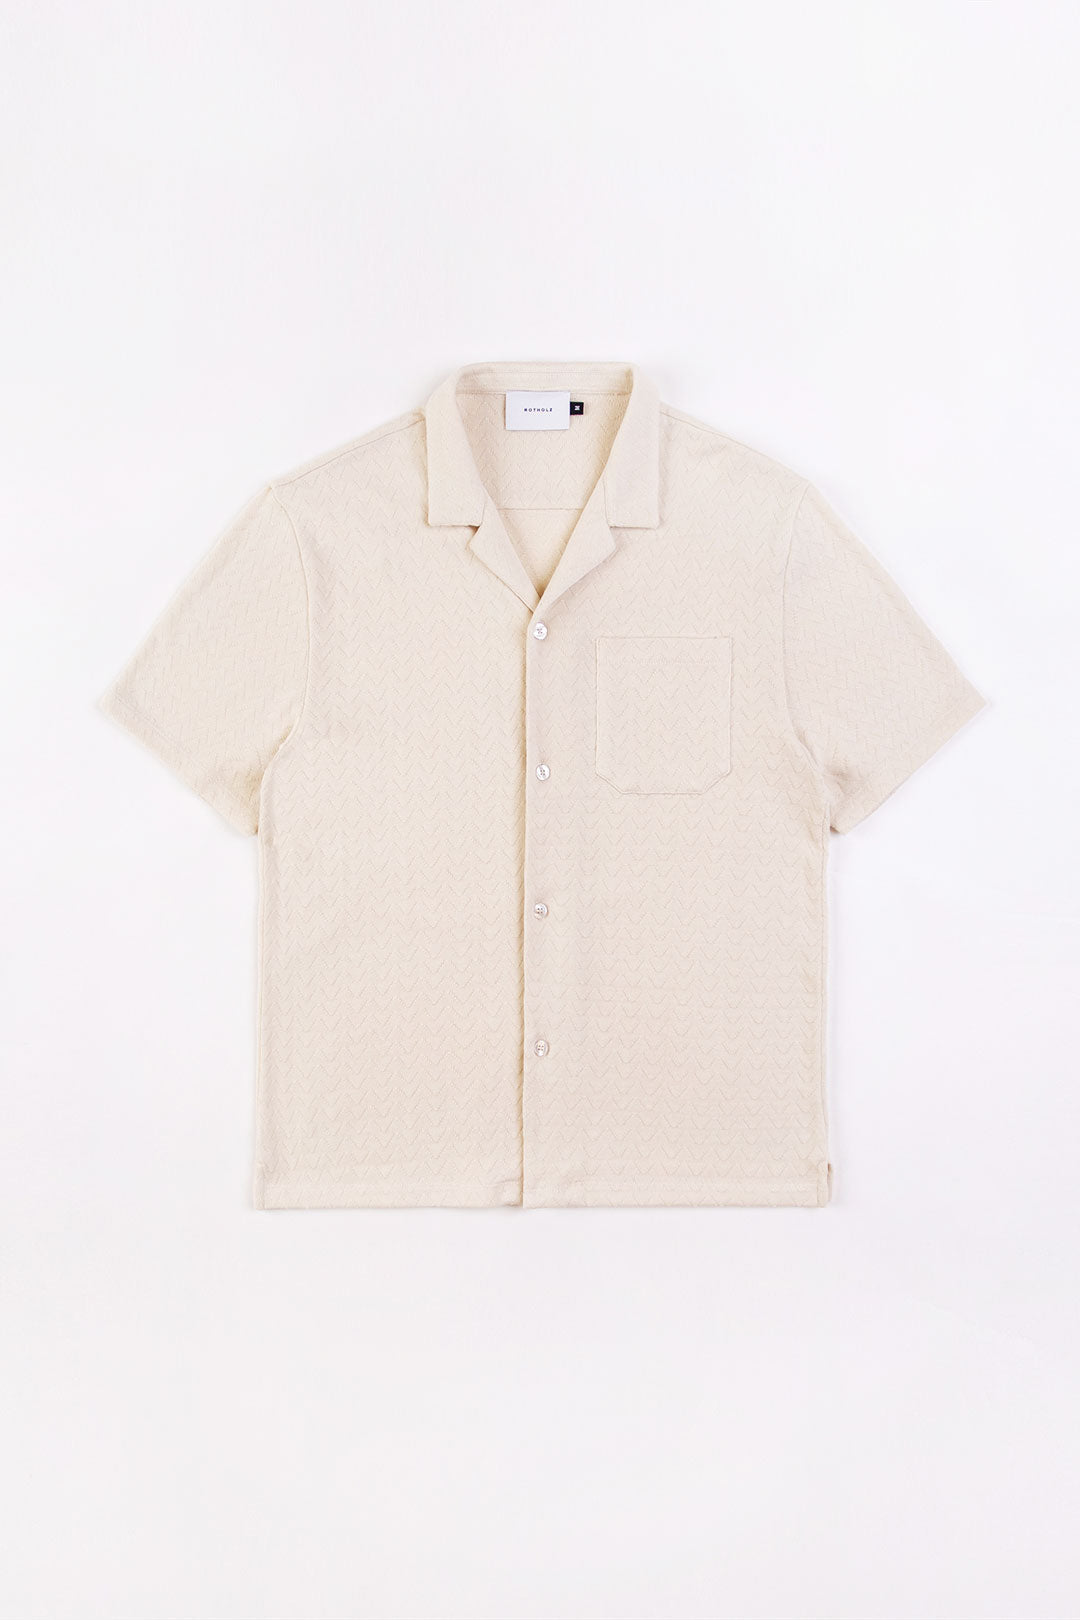 White knitted bowling shirt made from 100% organic cotton from Rotholz